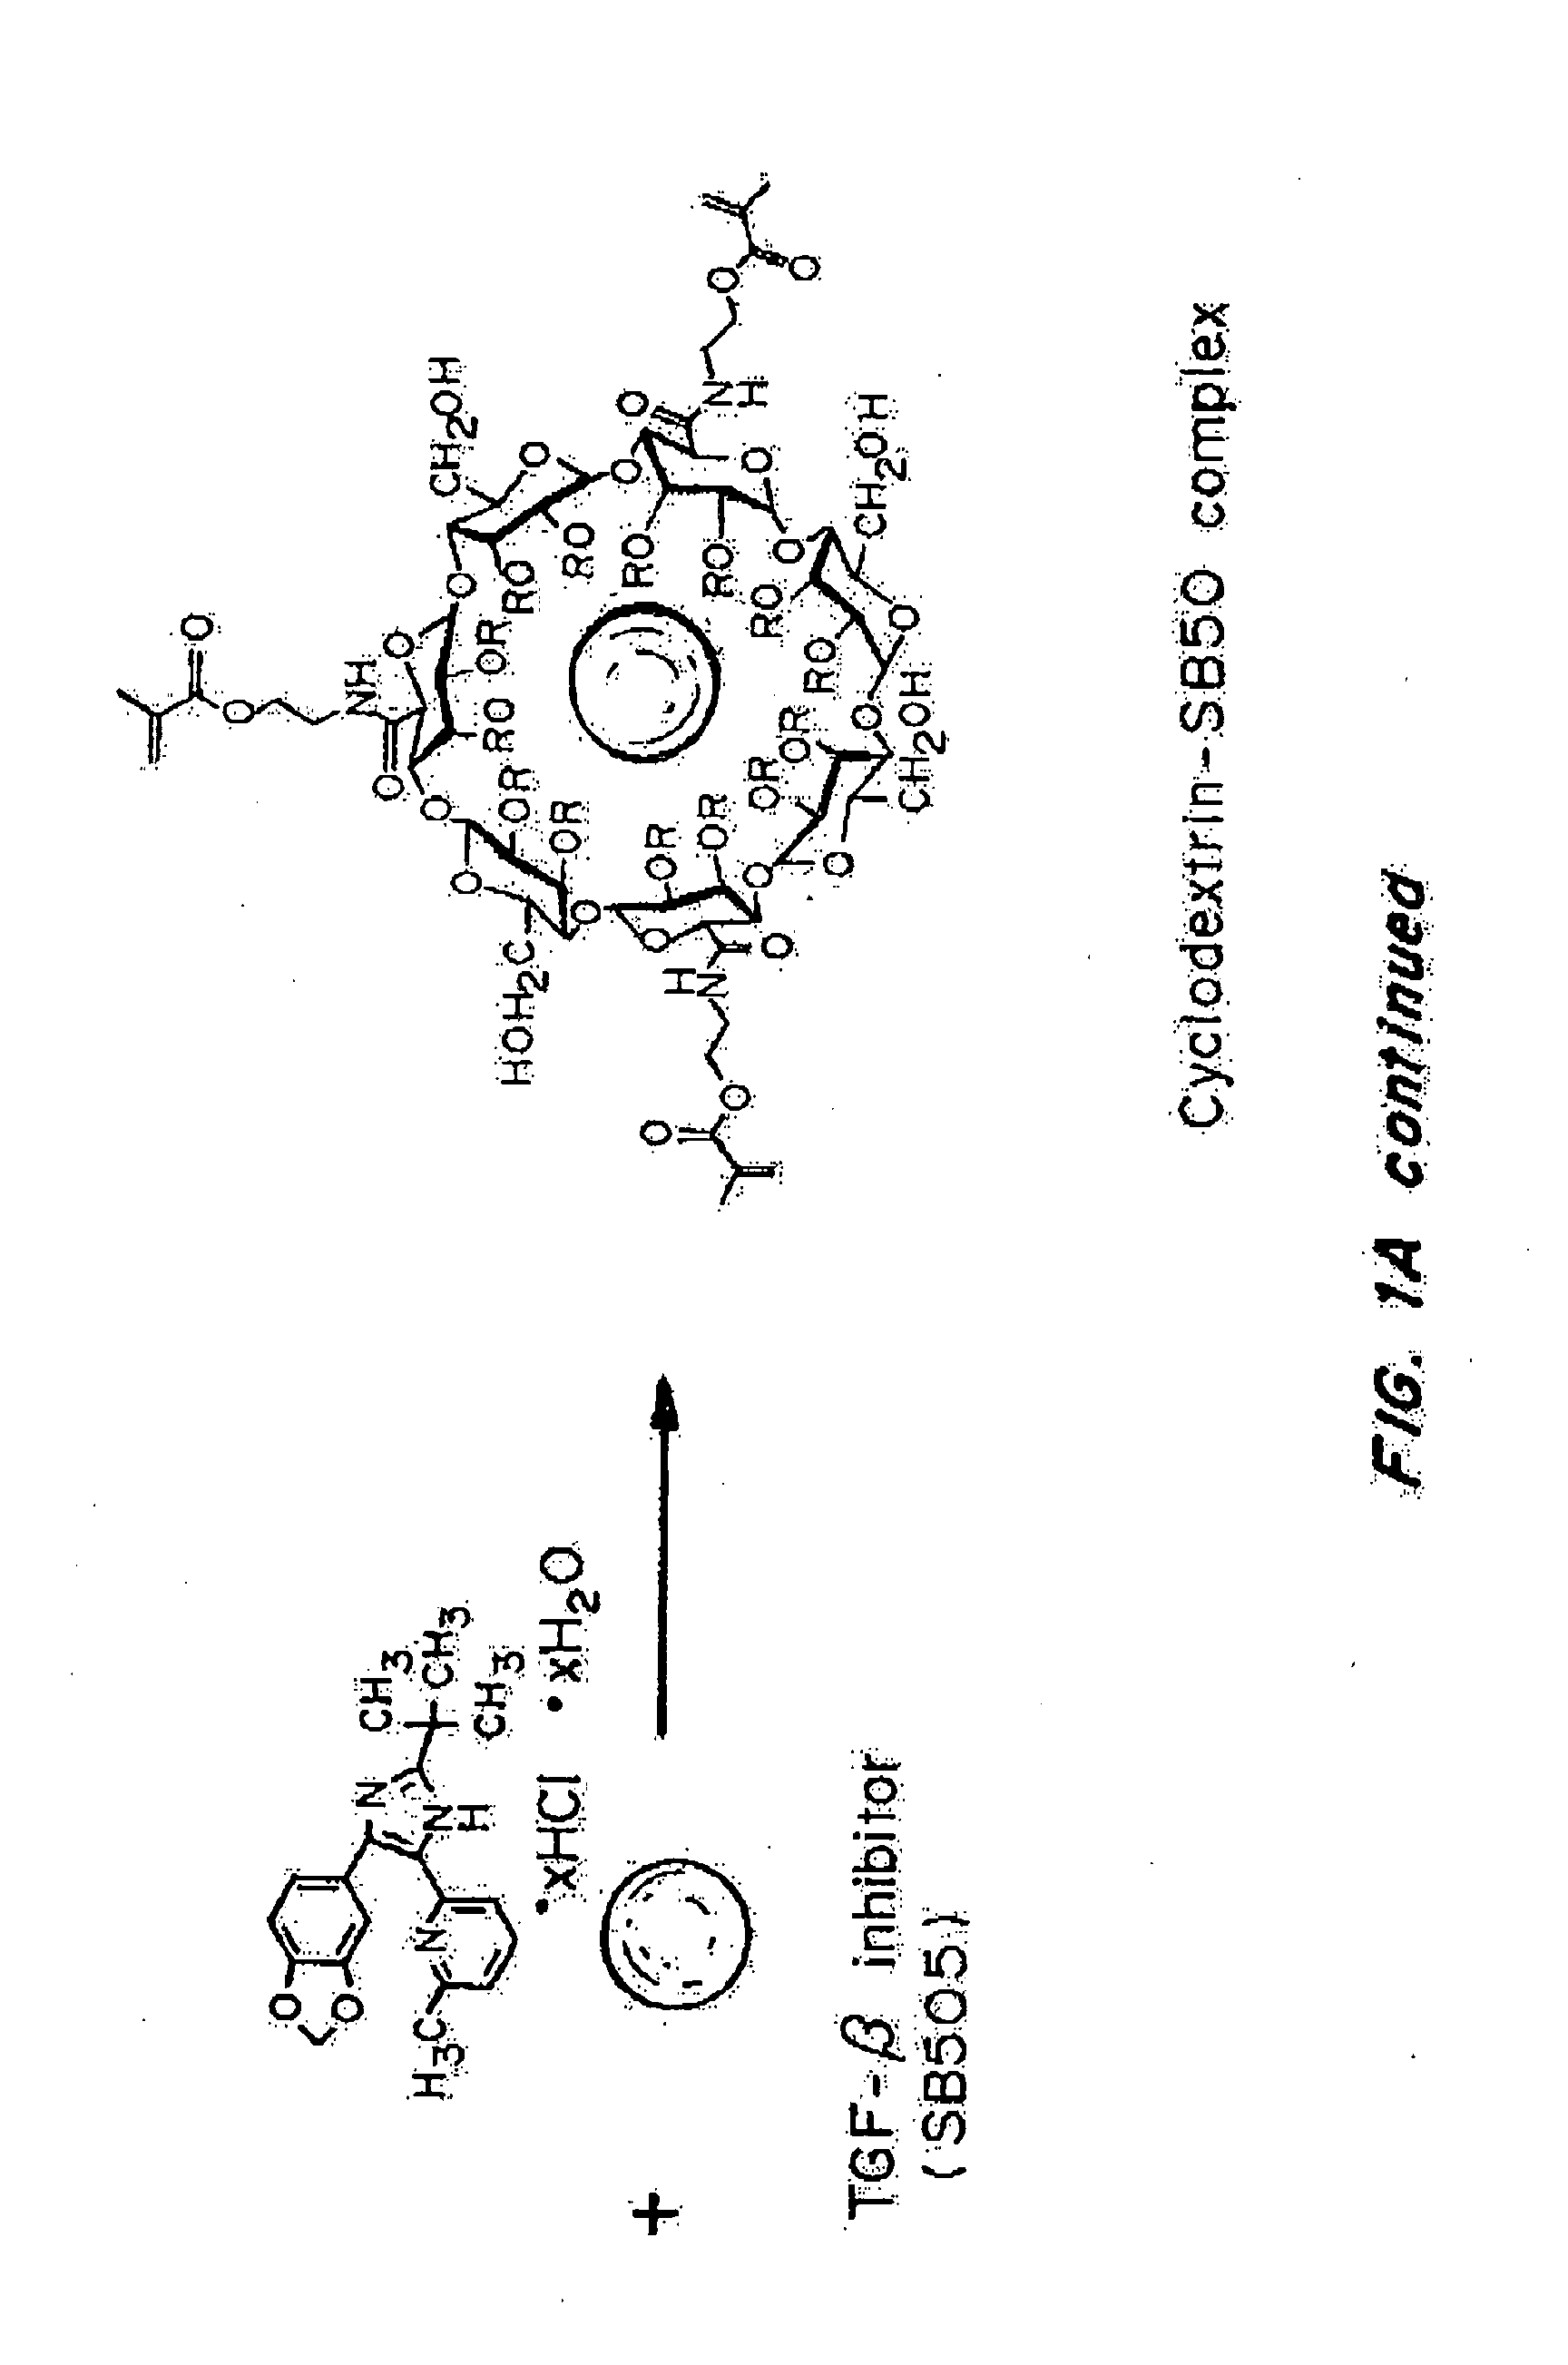 Methods of Treating Inflammatory and Autoimmune Diseases and Disorders